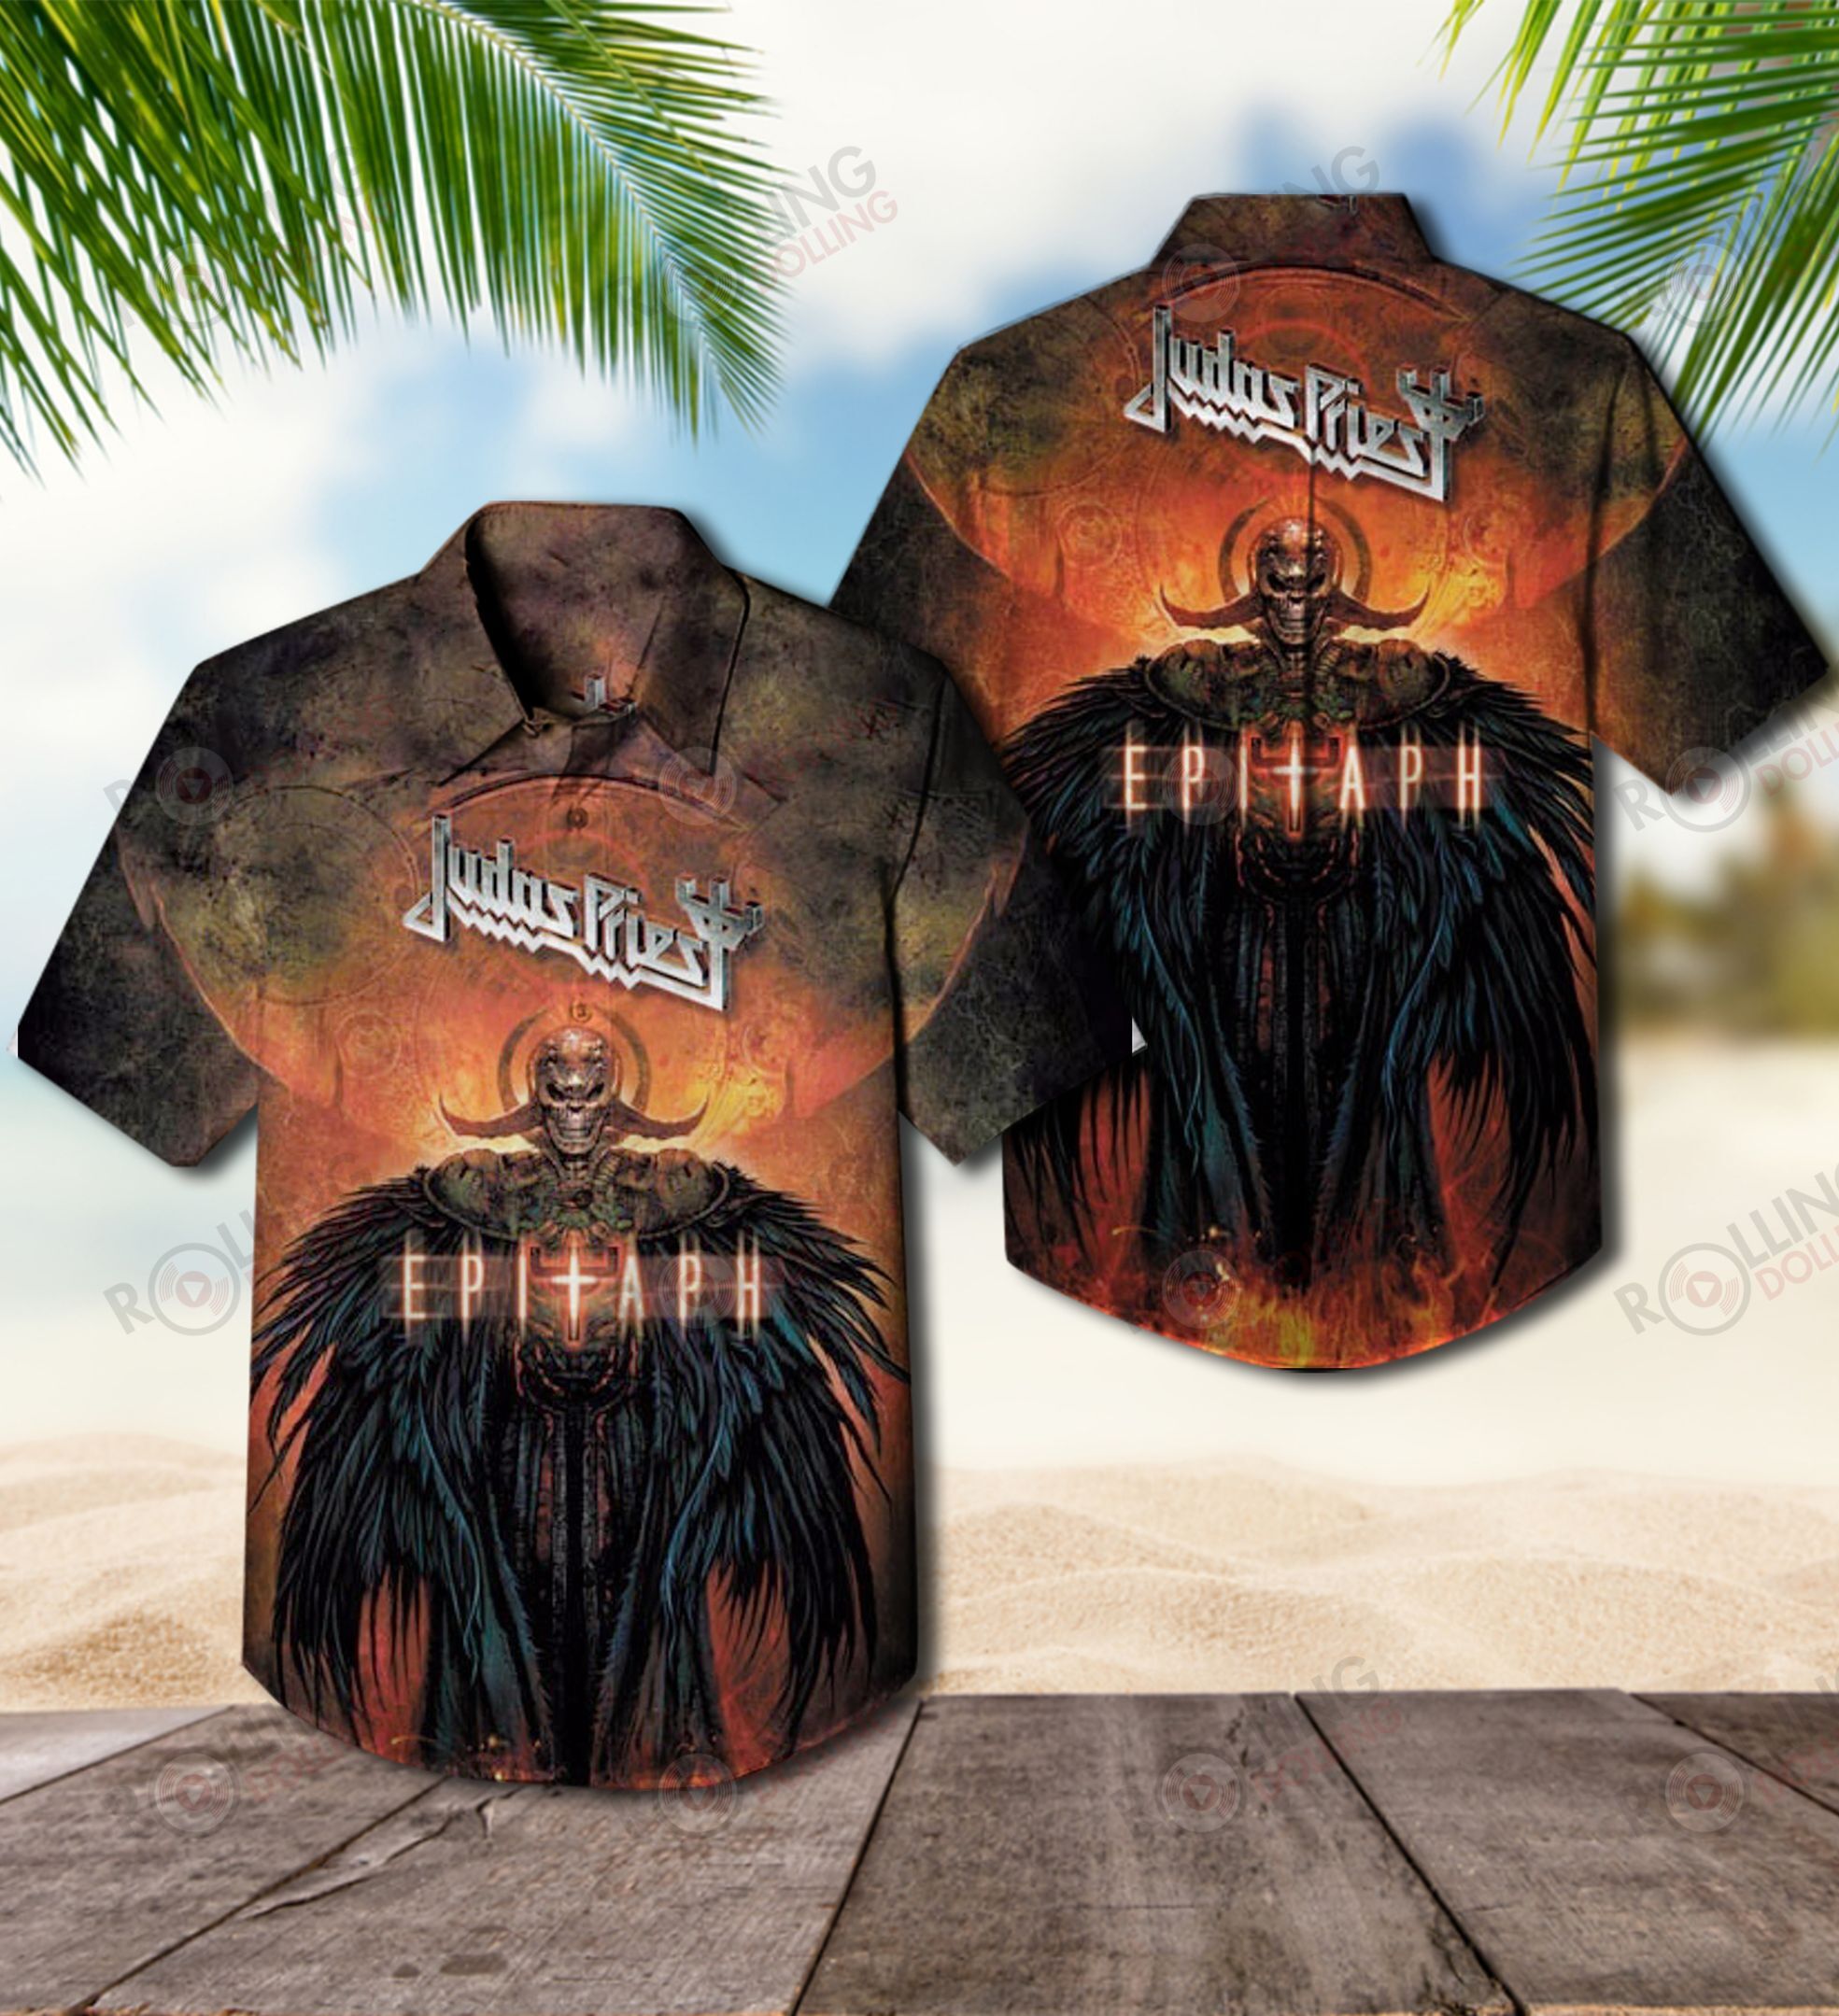 This would make a great gift for any fan who loves Hawaiian Shirt as well as Rock band 226